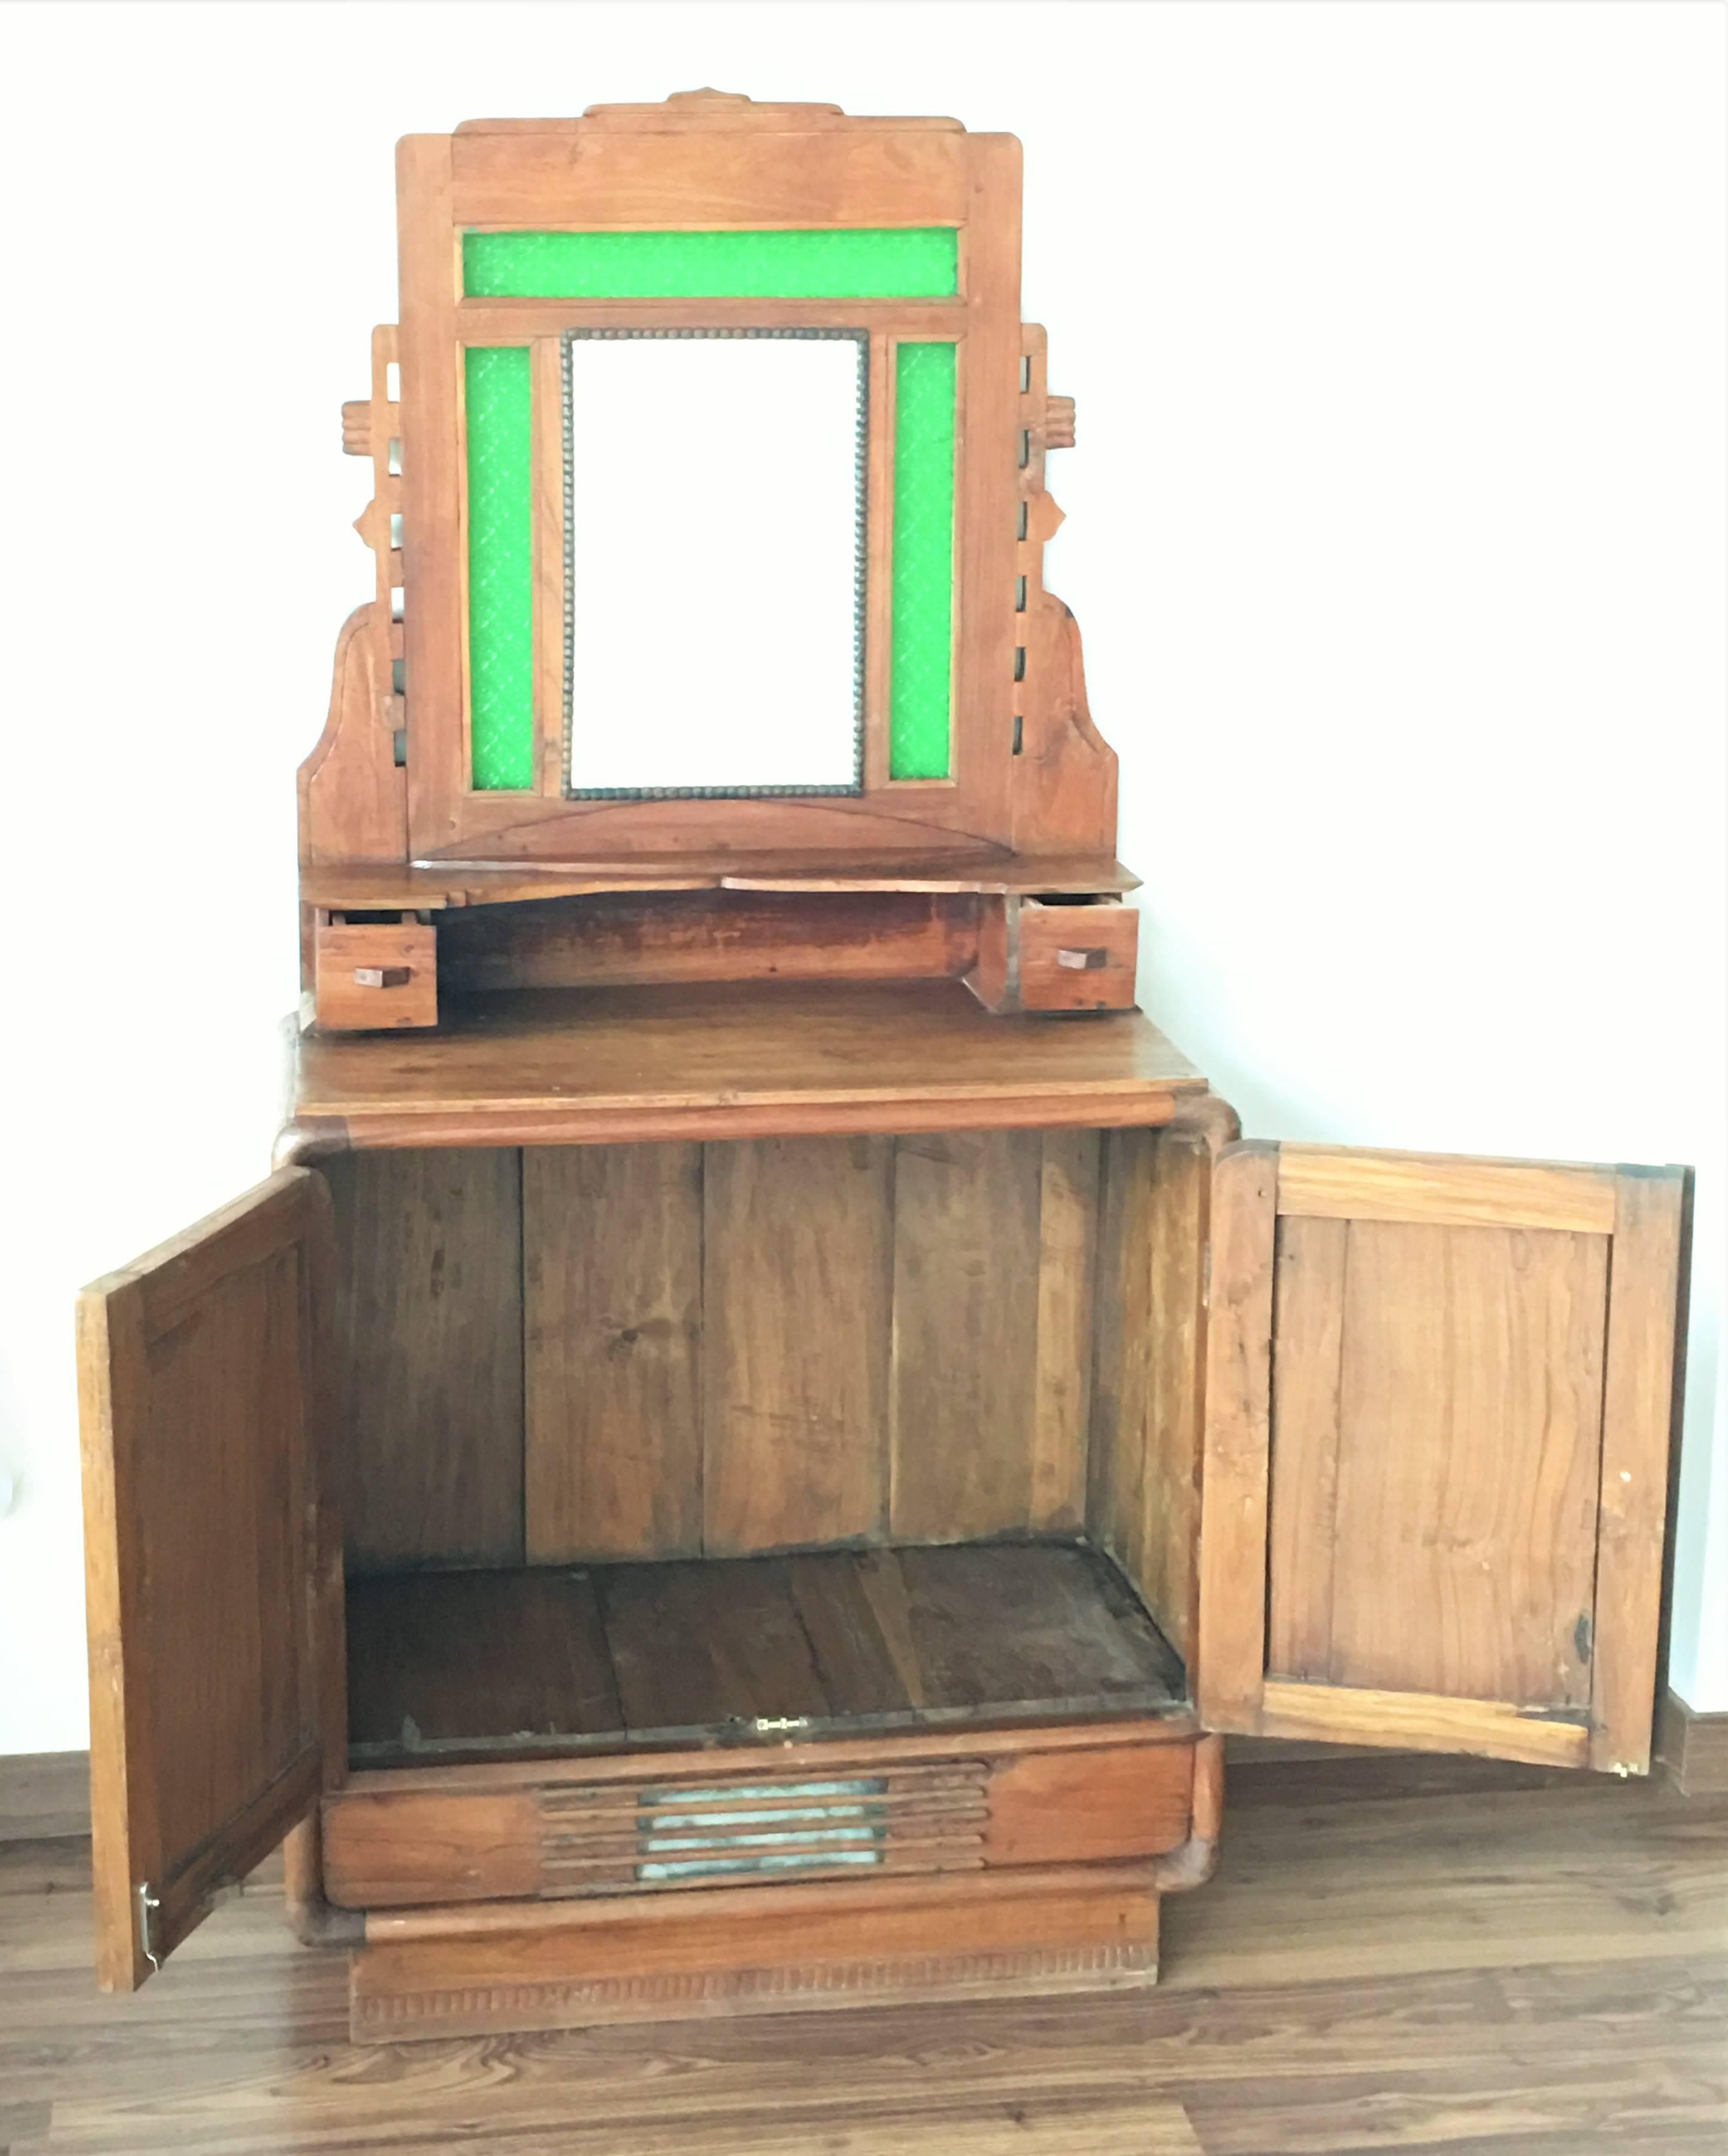 Sideboard with mirror and original green glass.
